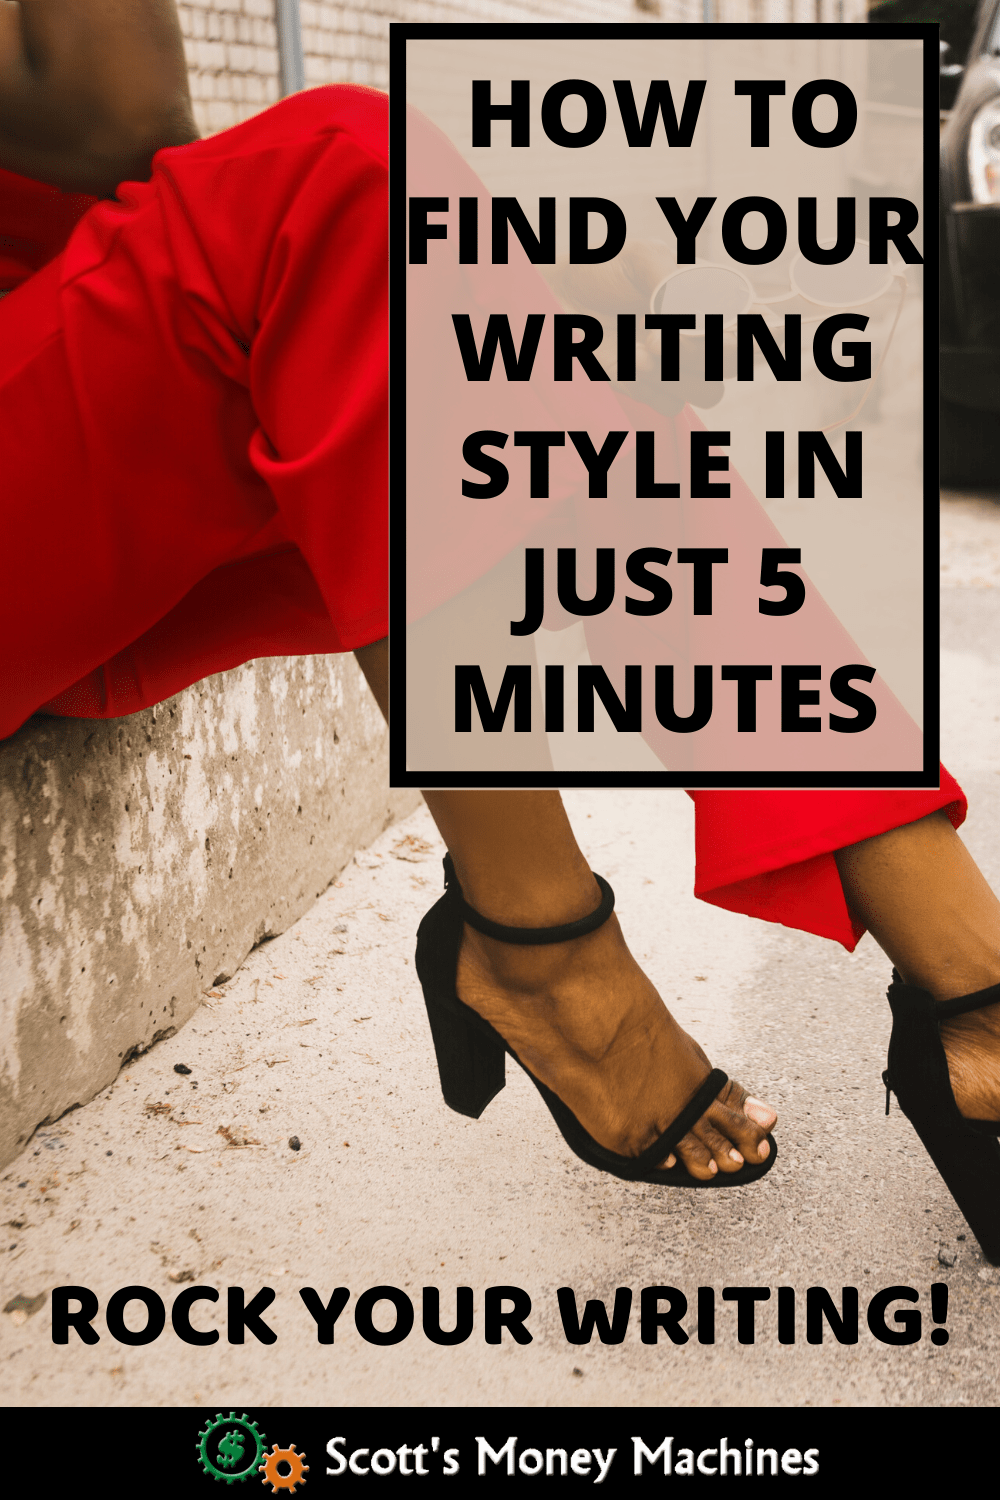 How to find your writing style in 5 minutes